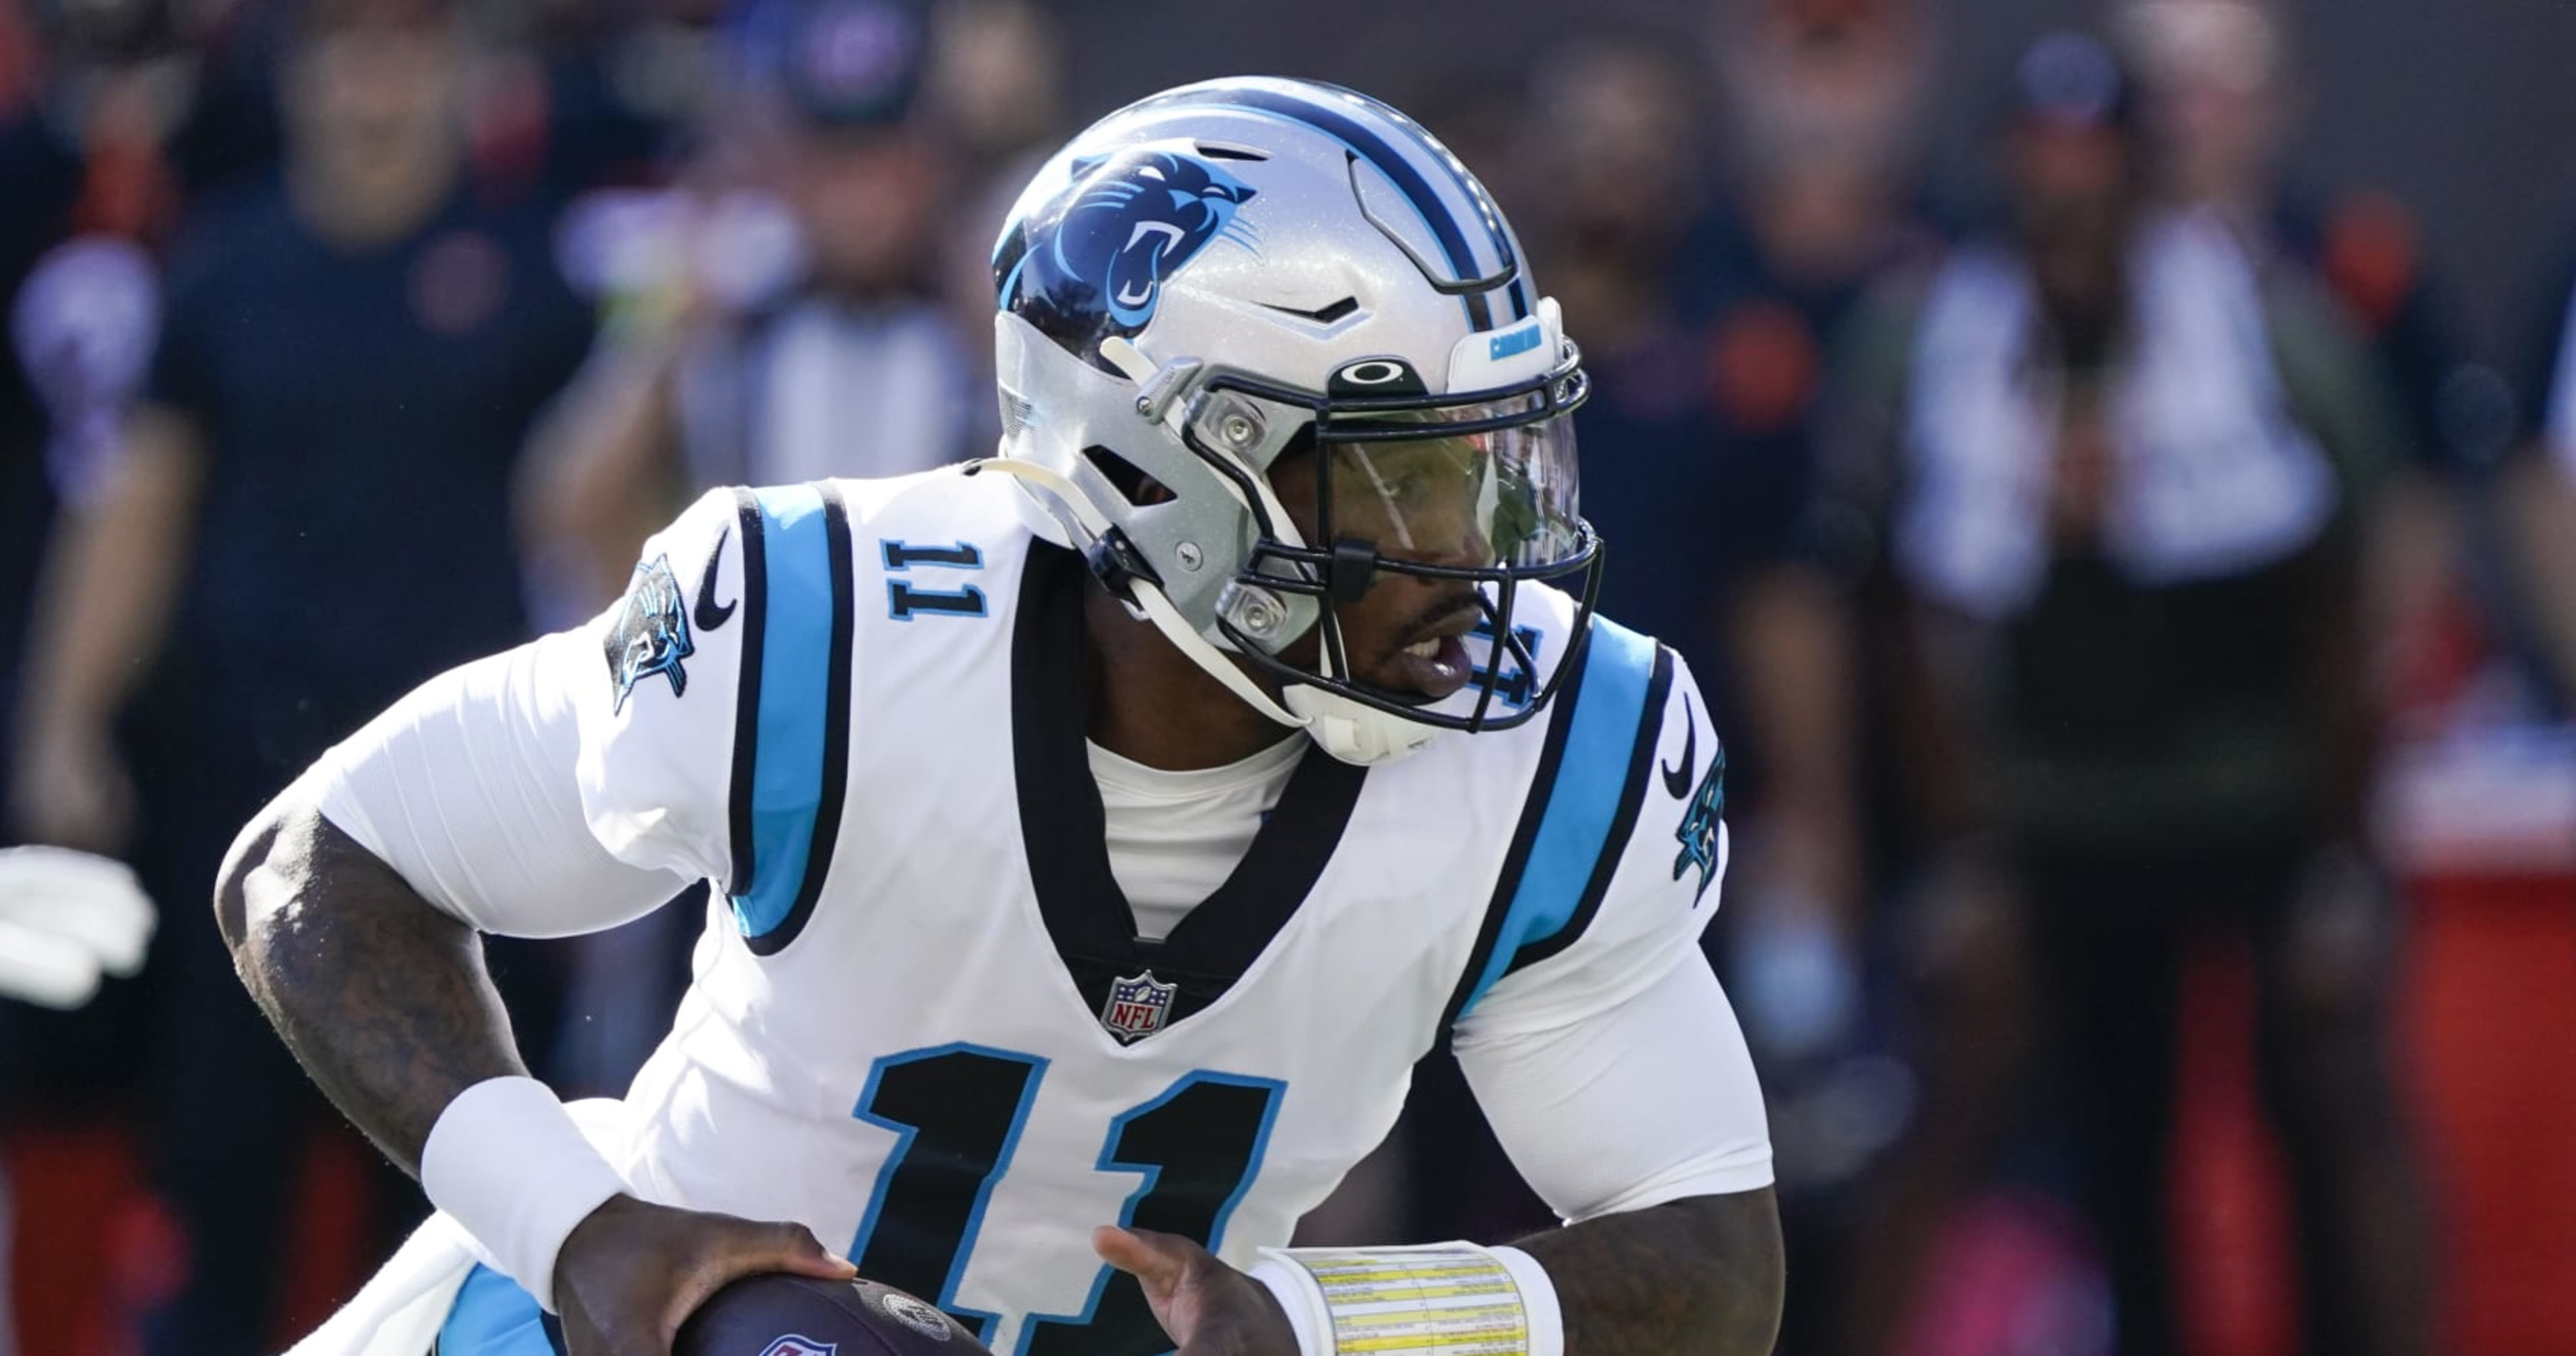 Report: PJ Walker to Start for Panthers vs. Falcons over Baker Mayfield